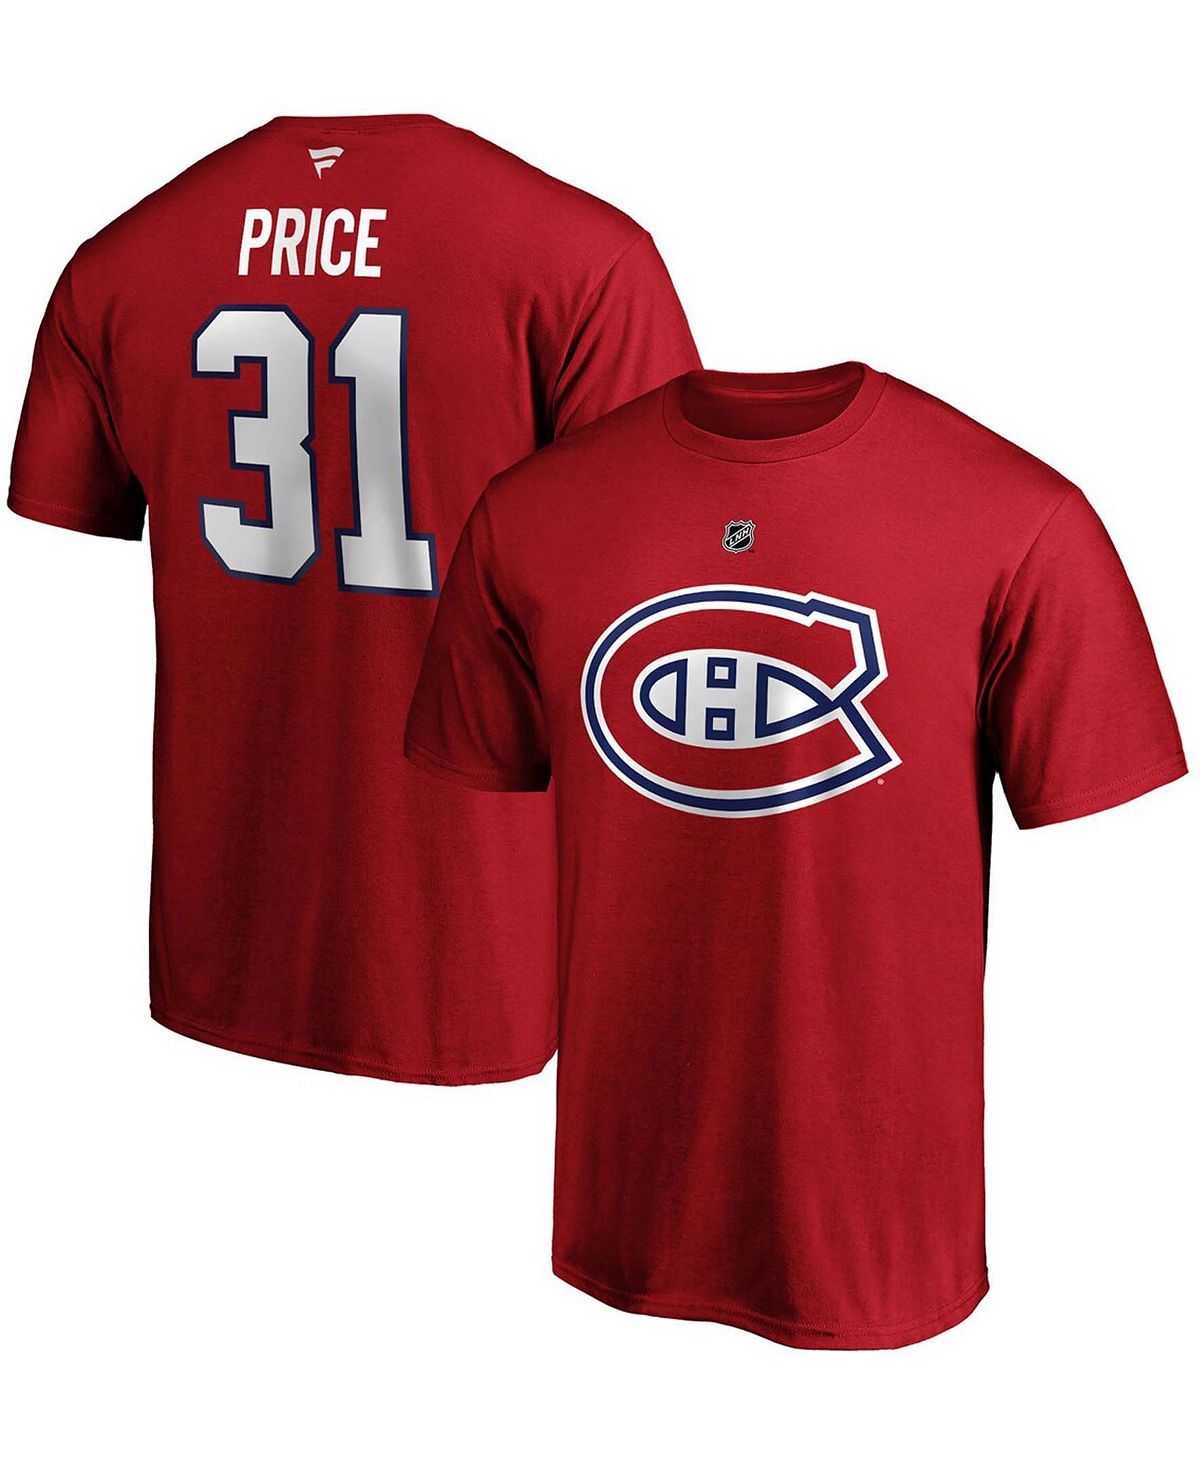 Мужская футболка с логотипом carey price red montreal canadiens team authentic stack name and number Fanatics, красный adjustable number letter metal base counter shelf top price talker display ground arabic jewelry number combined price tag cubes